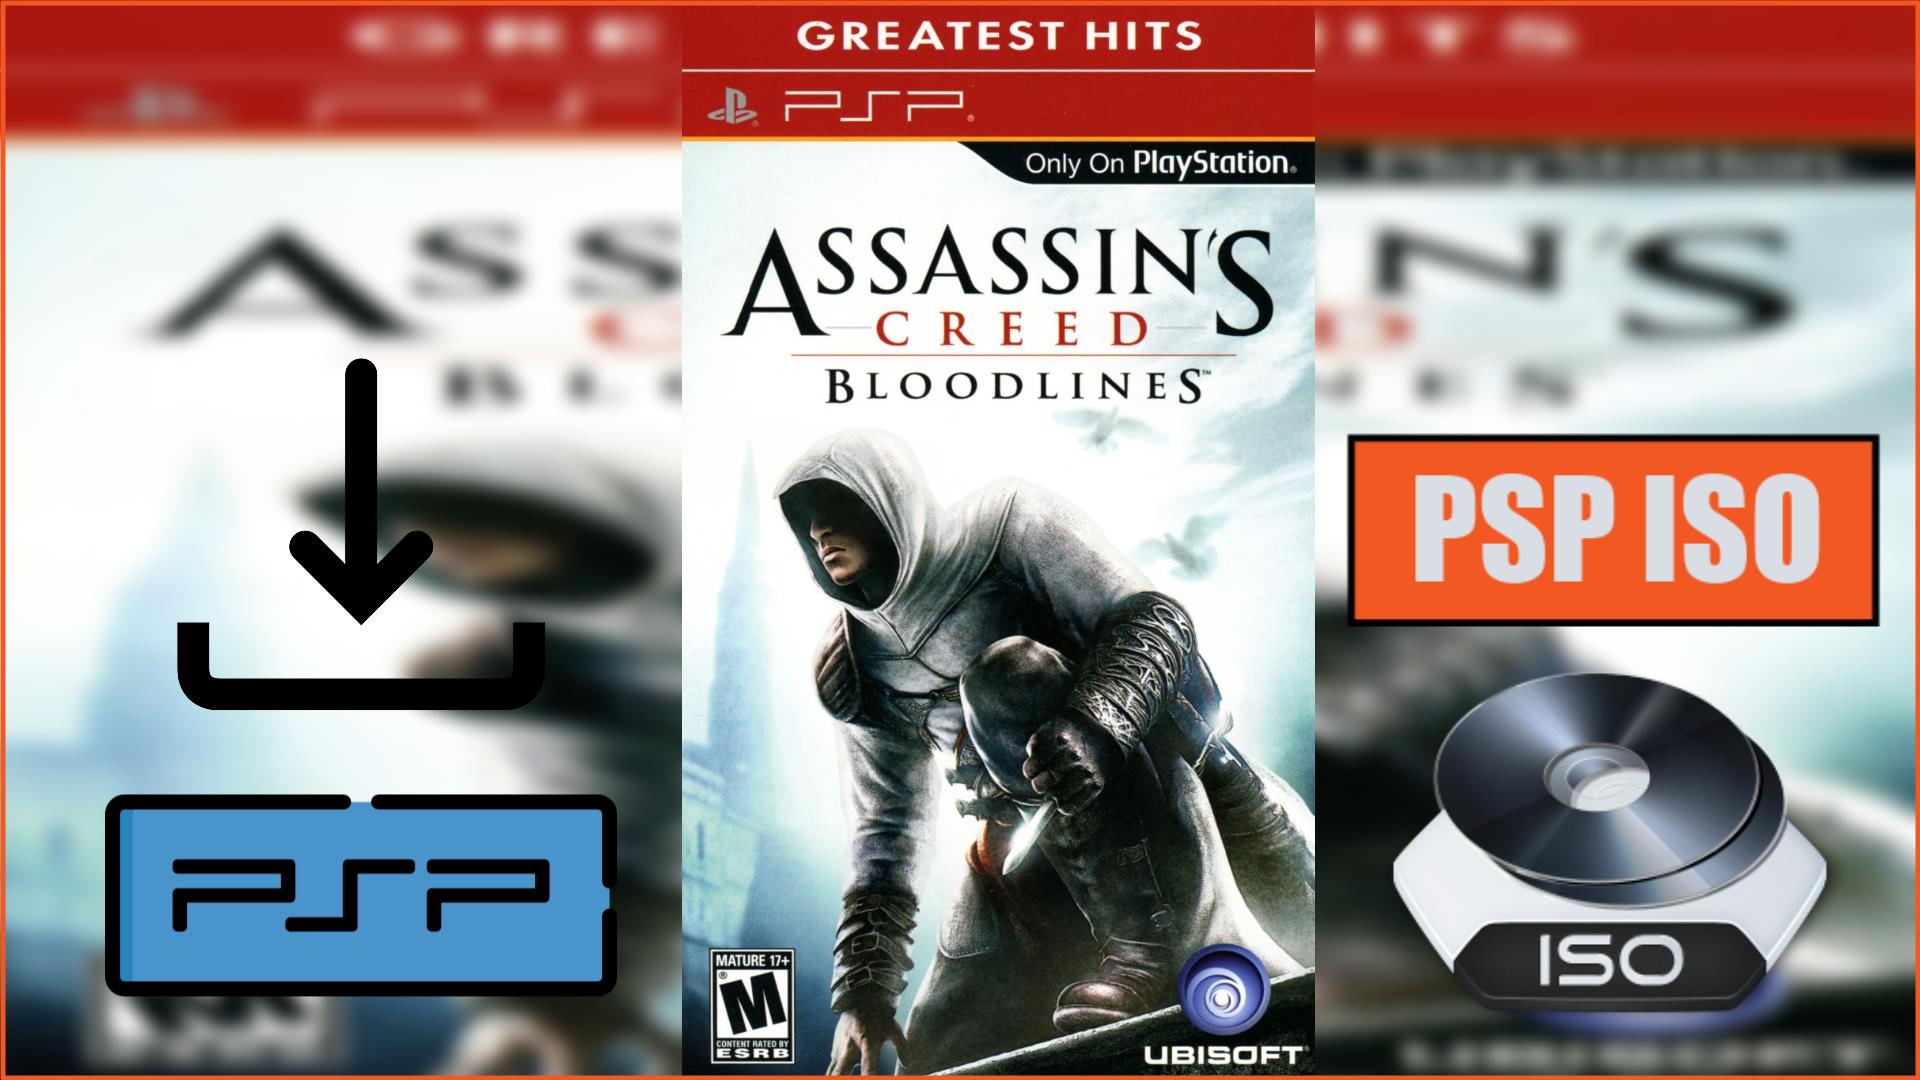 [100% SaveGame] Assassins Creed Bloodlines PSP - Everything is